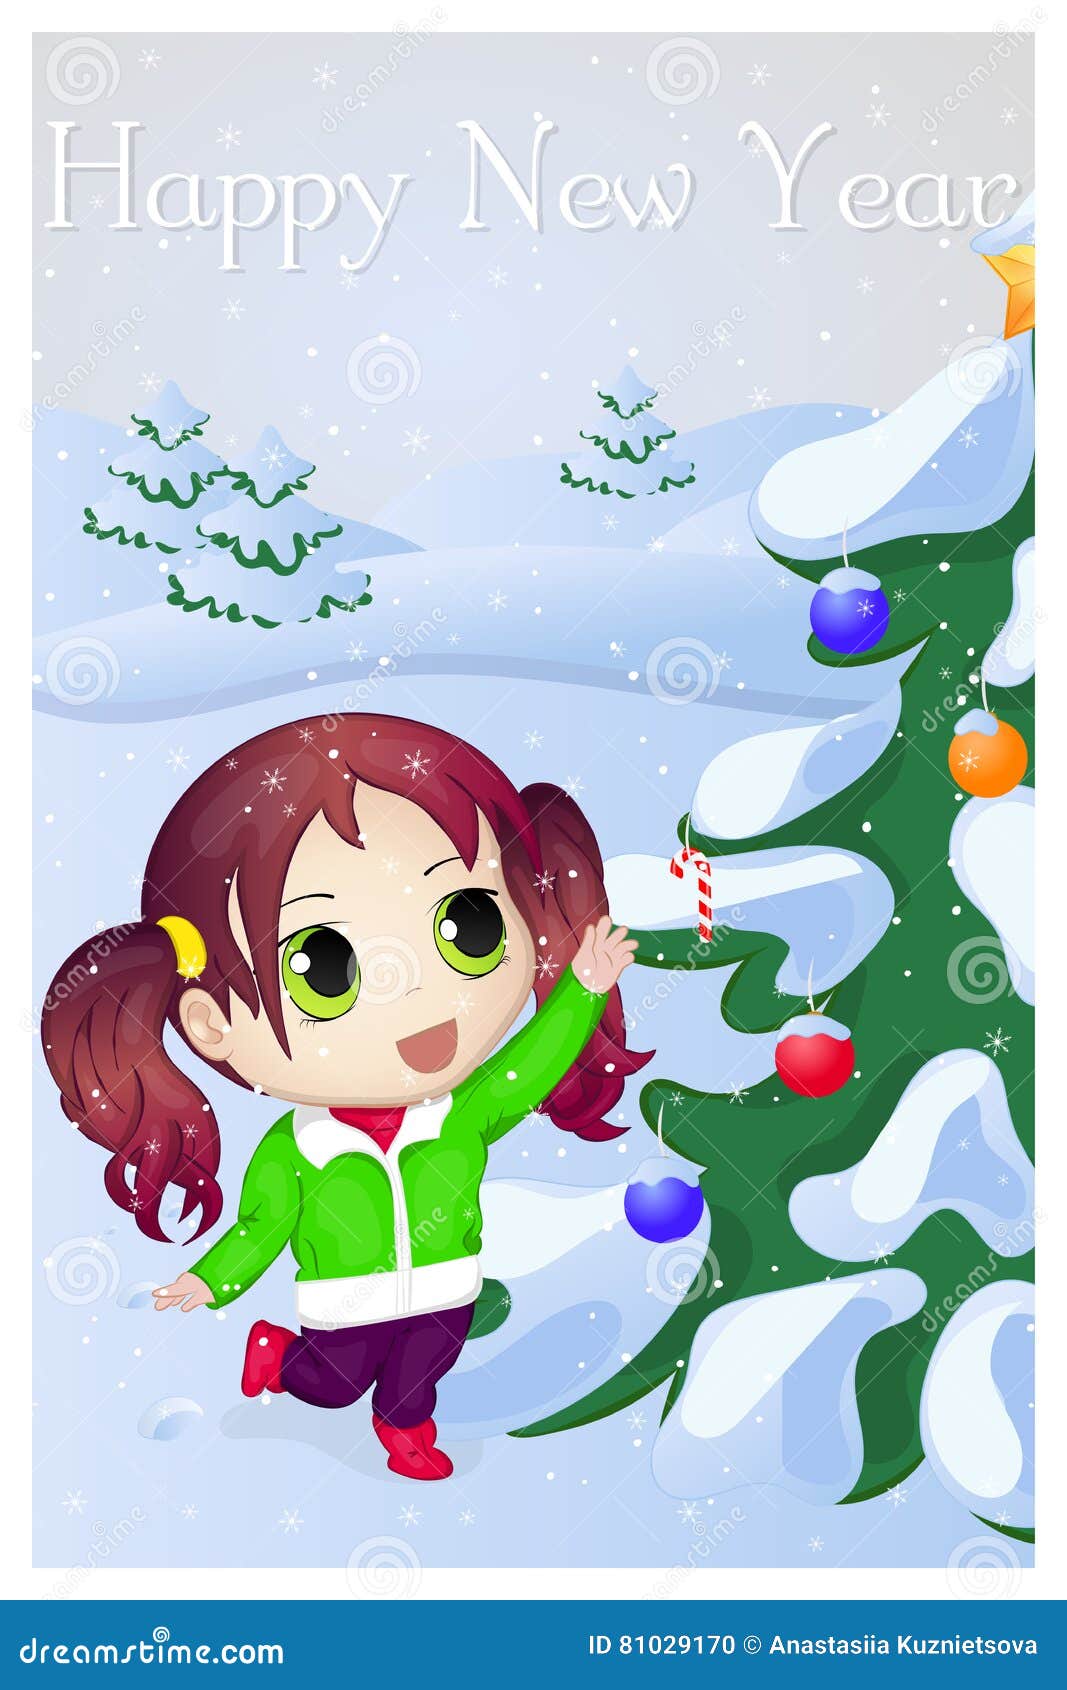 Cute Anime Chibi Little Girl Trying To Take Candy. Merry Christmas and Happy  New Year Card. Christmas Card in Cartoon Stock Vector - Illustration of  holiday, surprised: 81029170